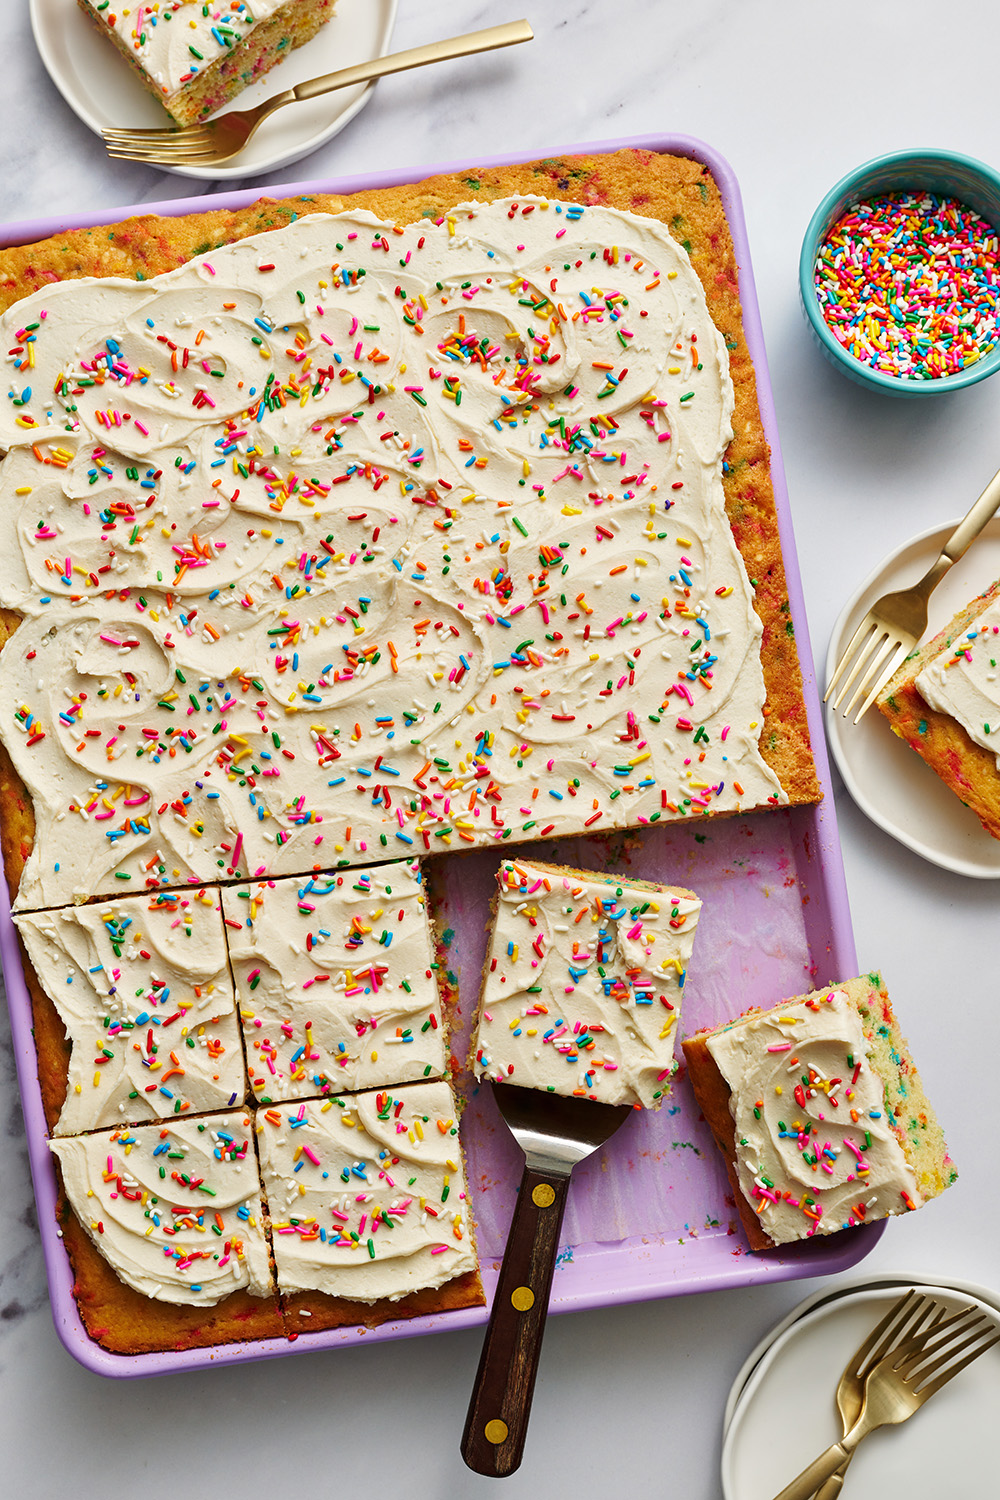 funfetti cake with cream cheese frosting swirled on top and sprinkles on top. slices cut out